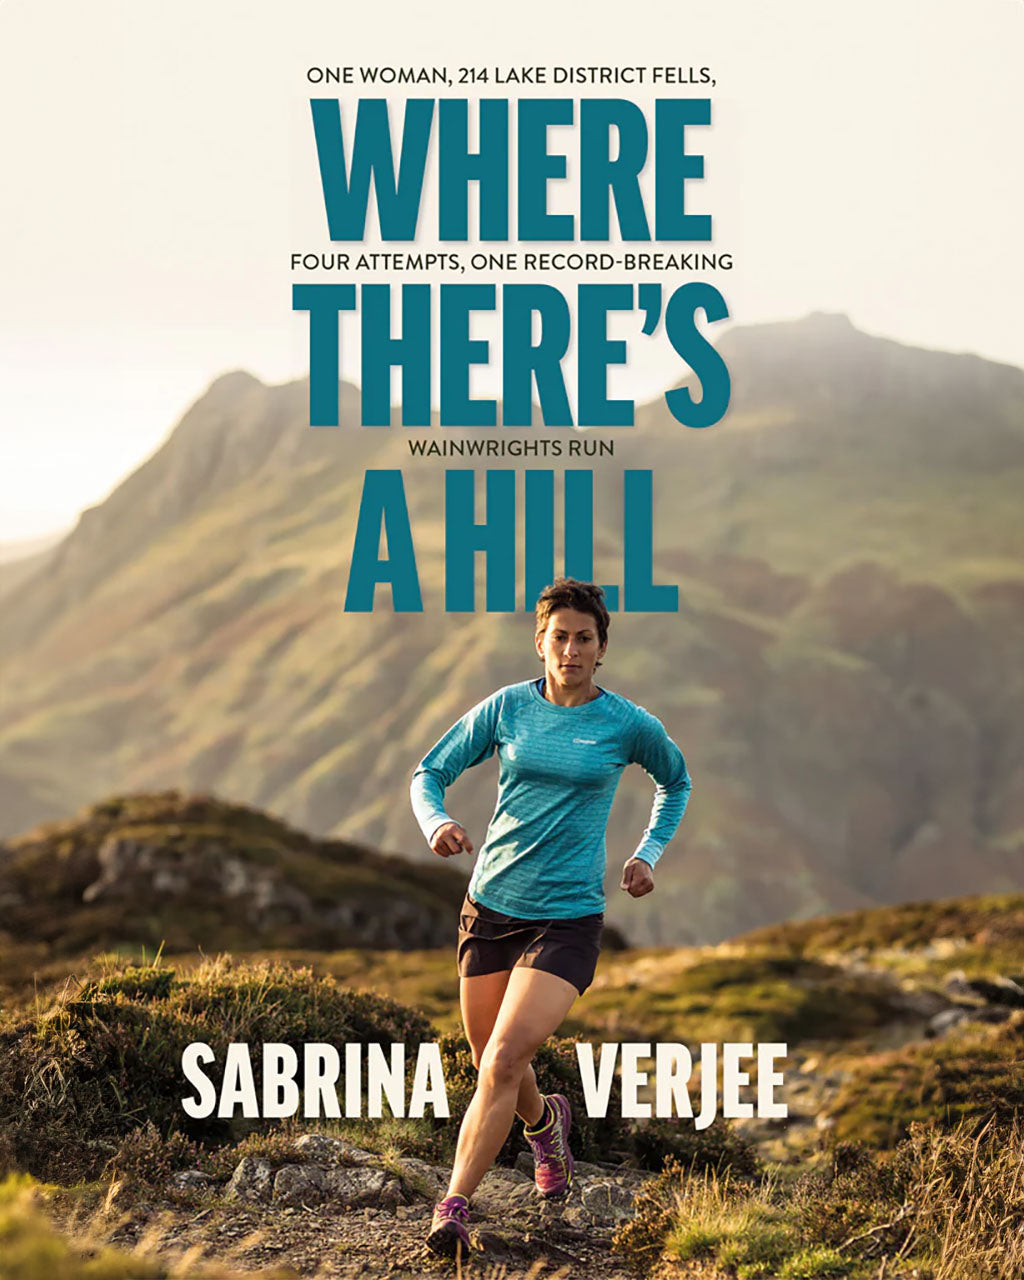 Where There's a Hill by Sabrina Verjee